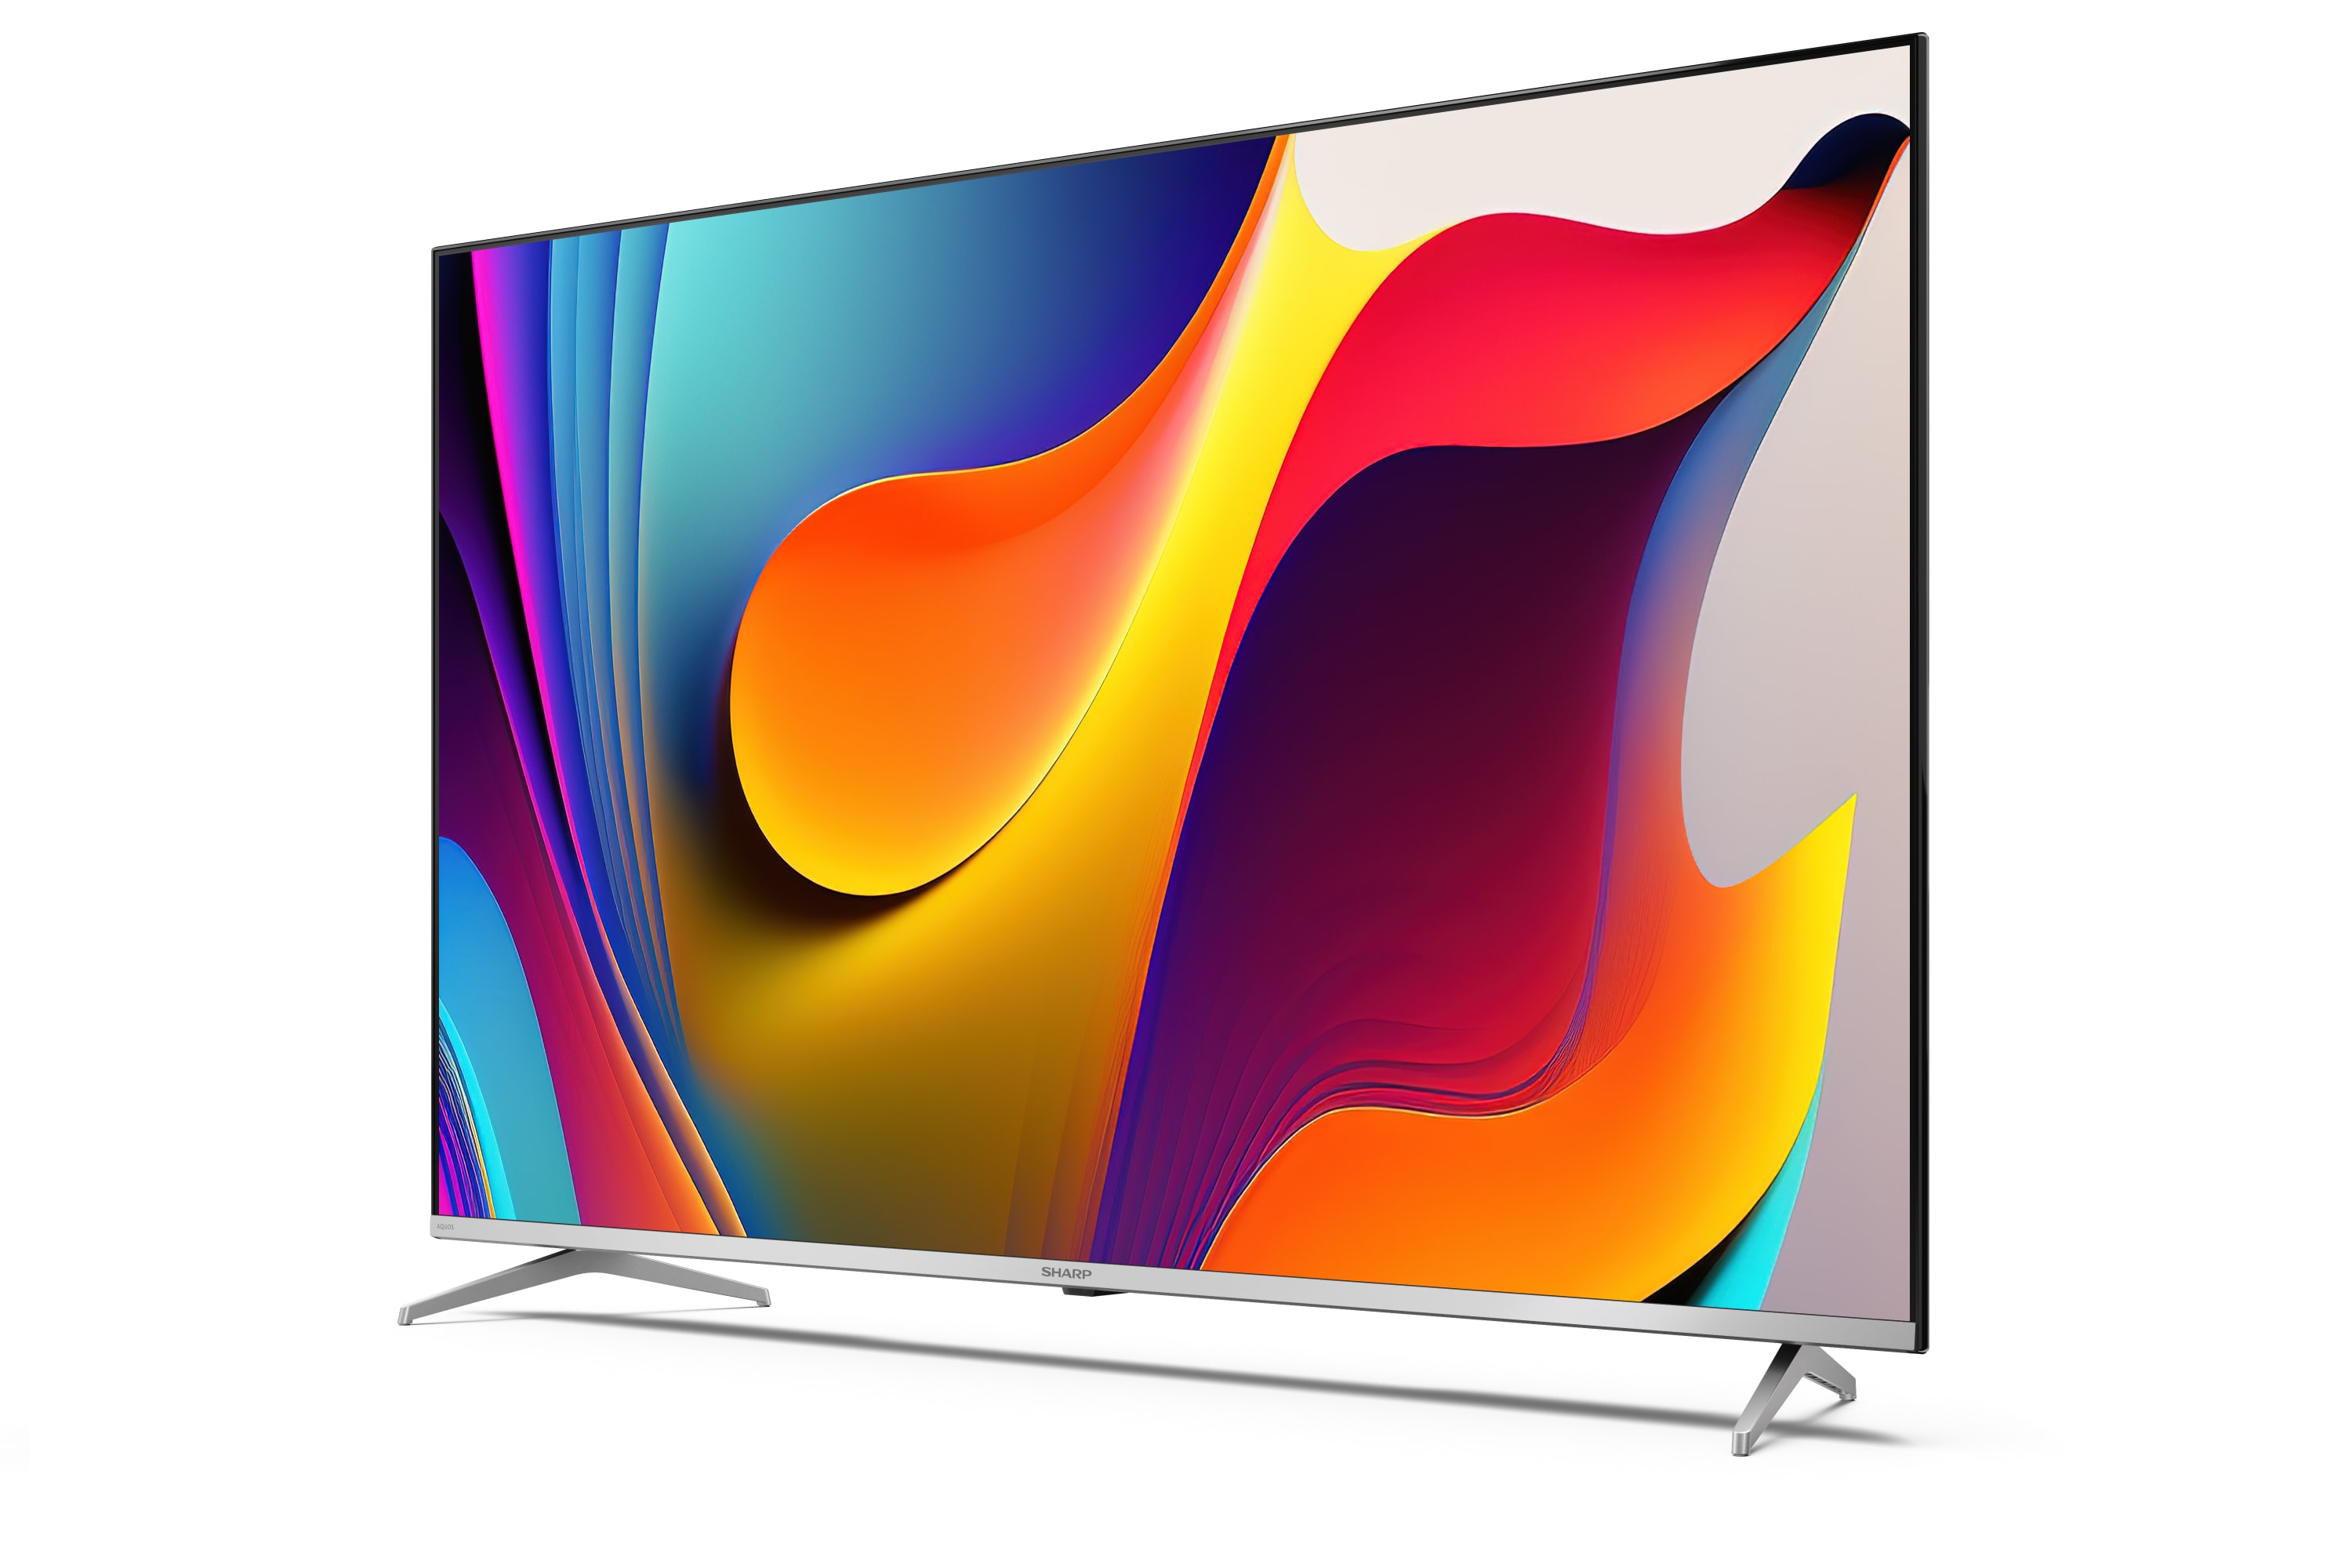 Android TV 4K UHD - 50" 4K ULTRA HD QUANTUM DOT SHARP ANDROID TV™